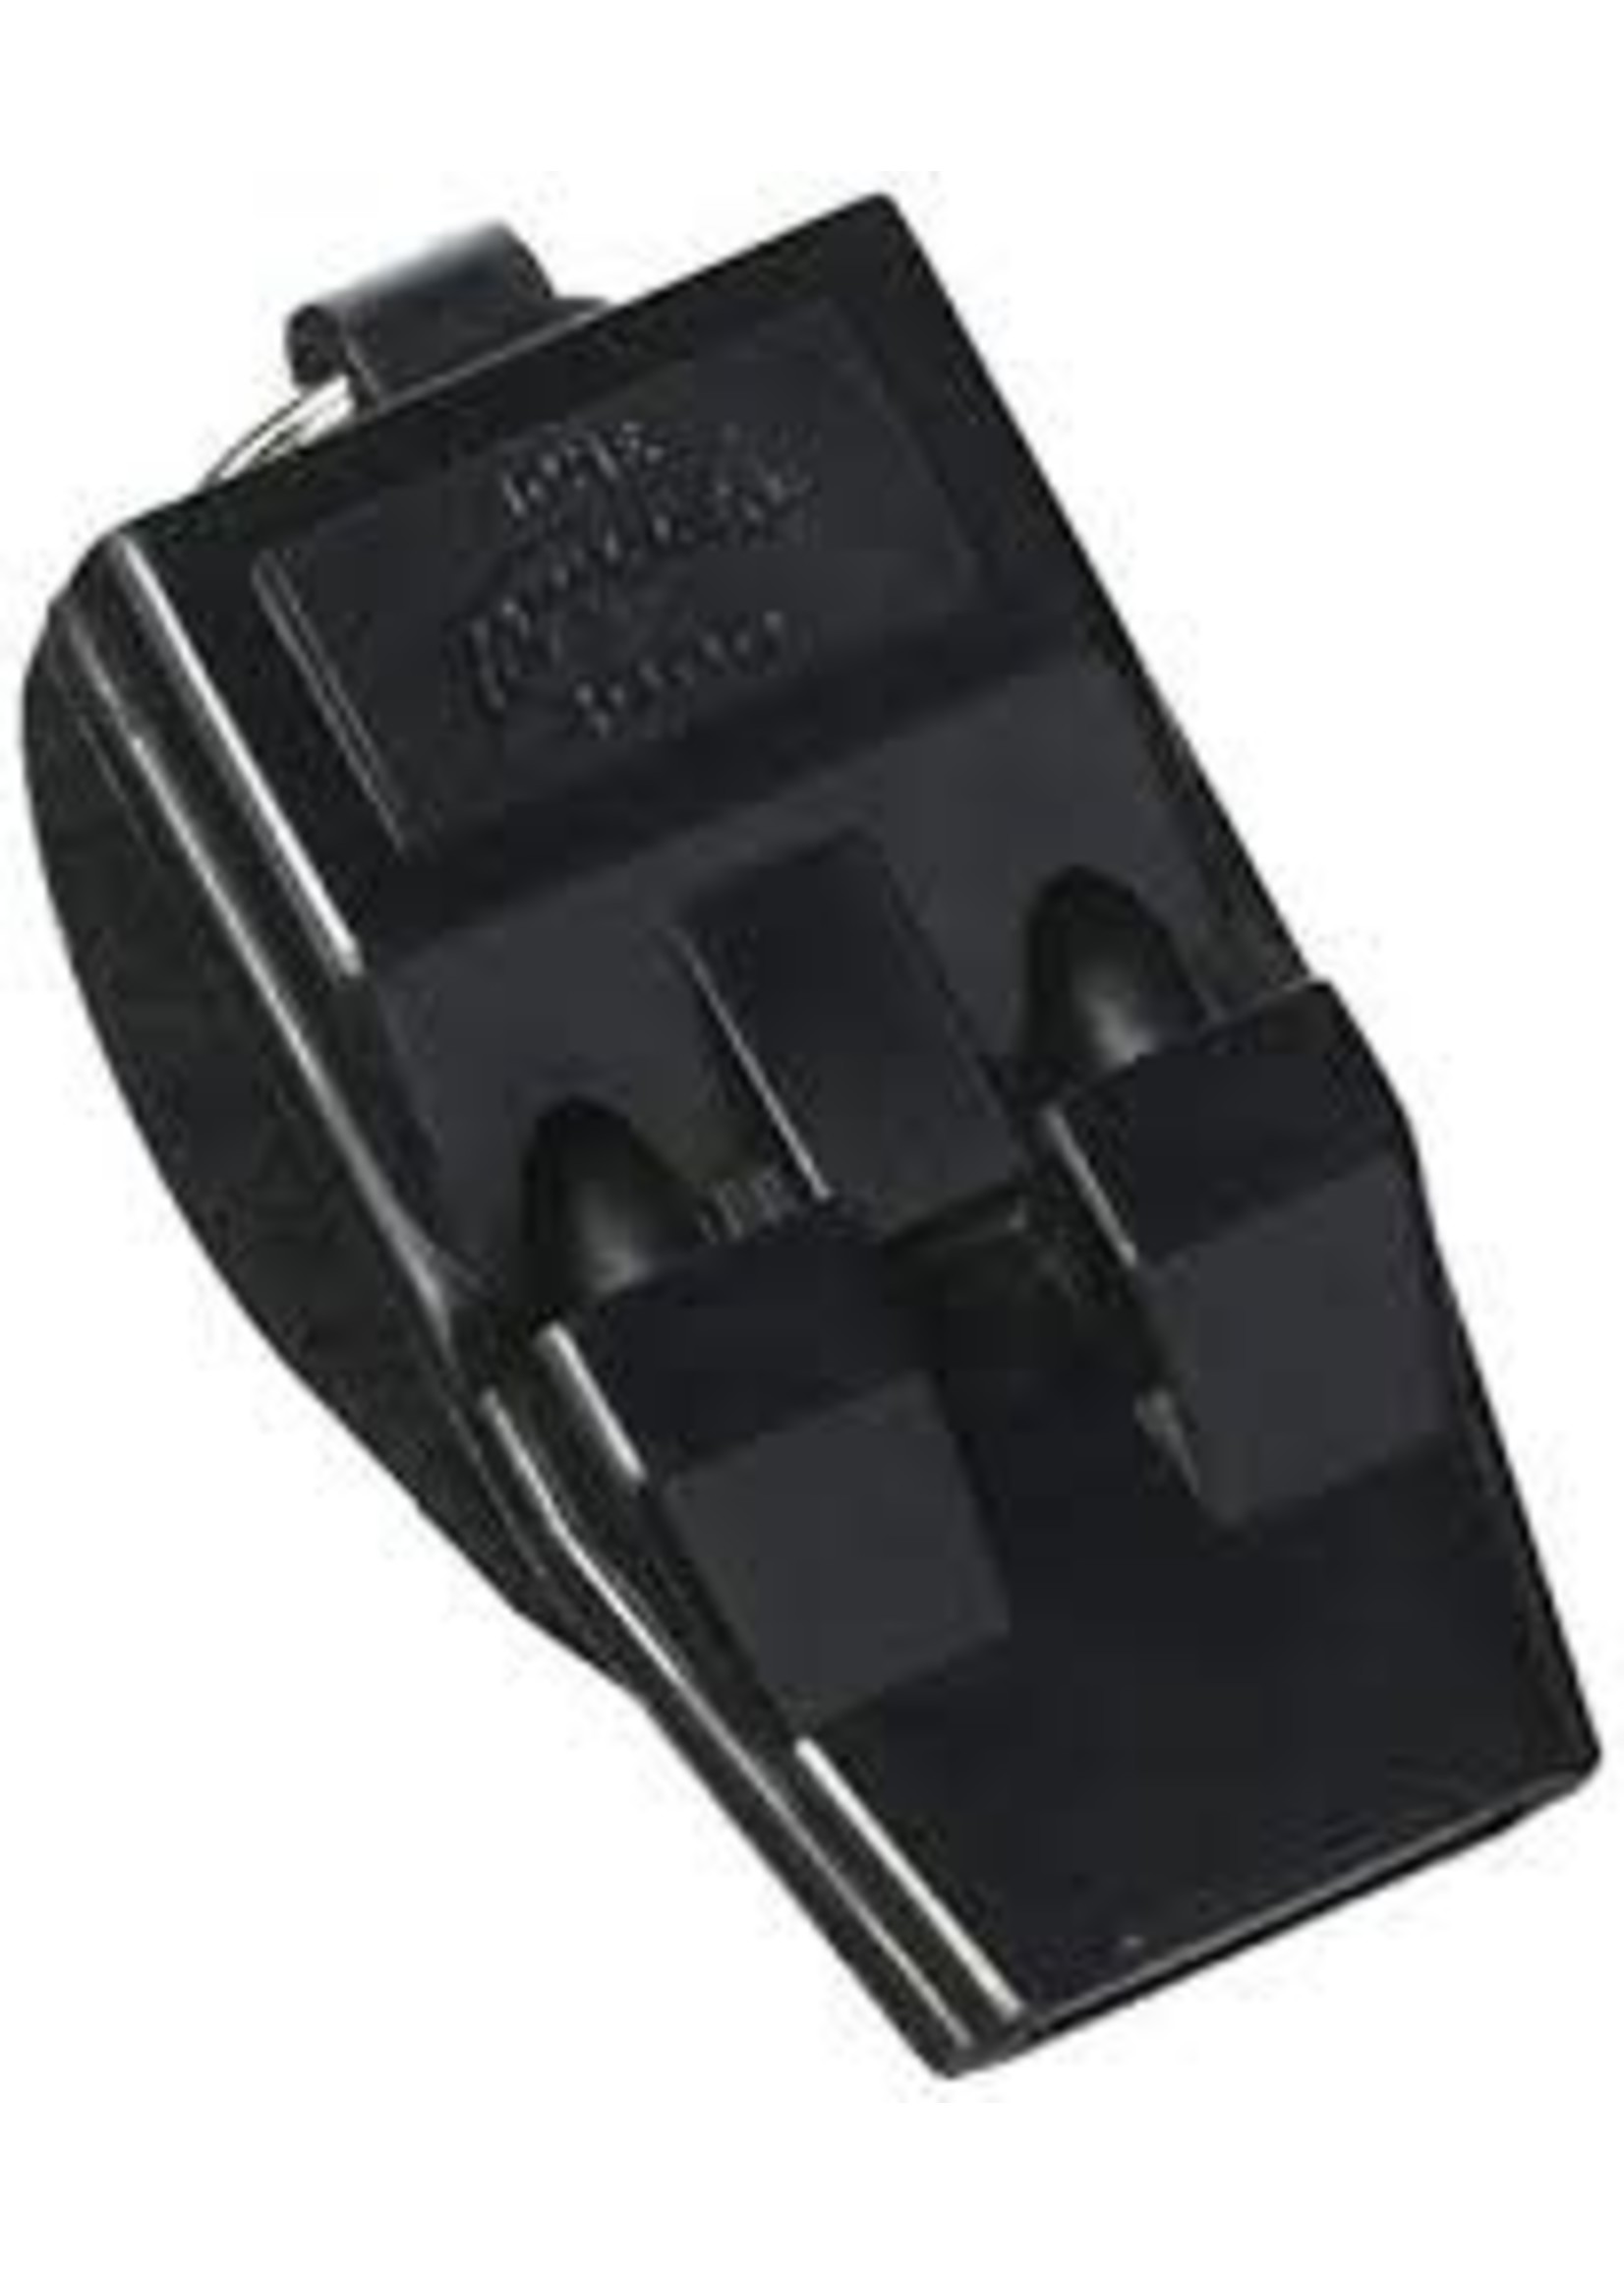 ACME ACME WHISTLE T200 W/3 SOUND CHAMB PEALESS